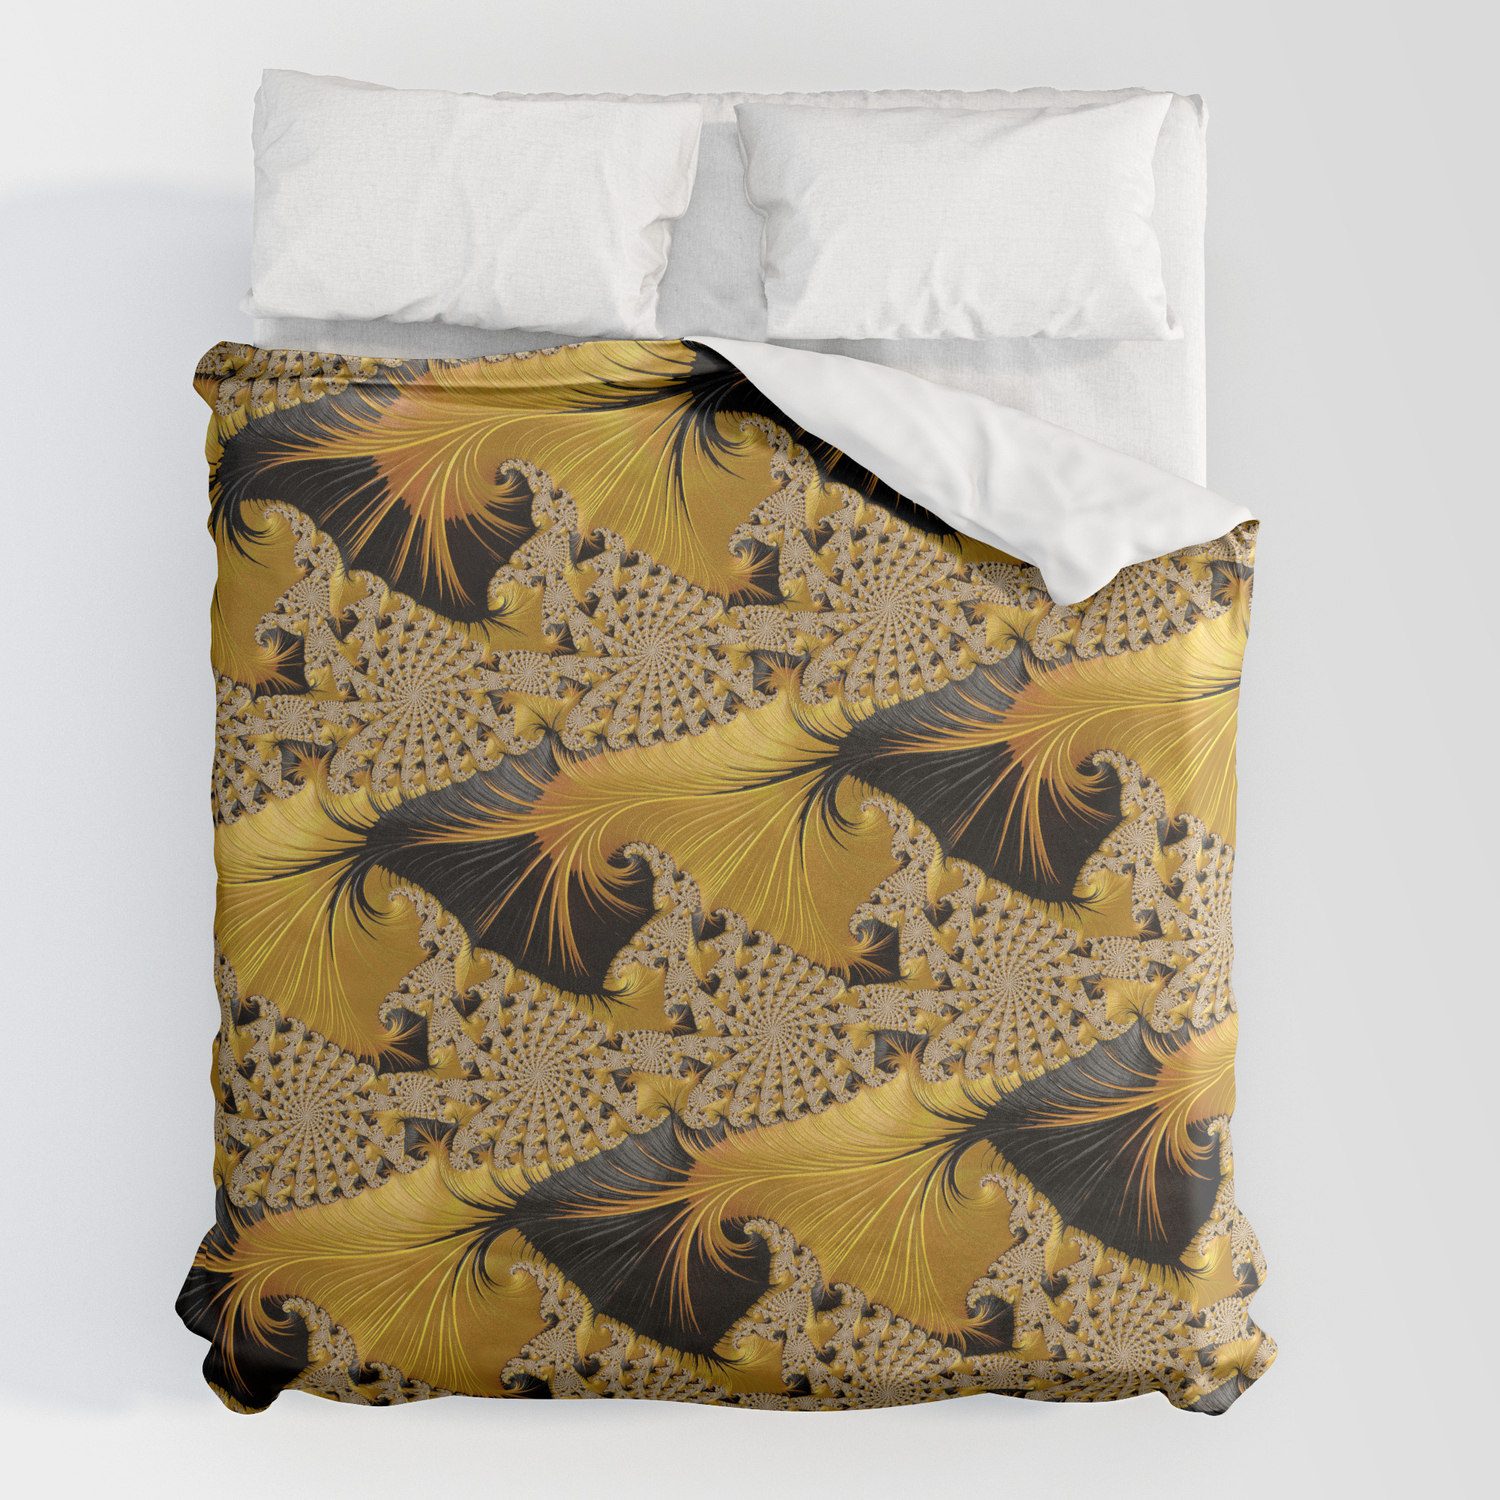 Gold Brocade Duvet Cover By Colleen, Brocade Duvet Covers